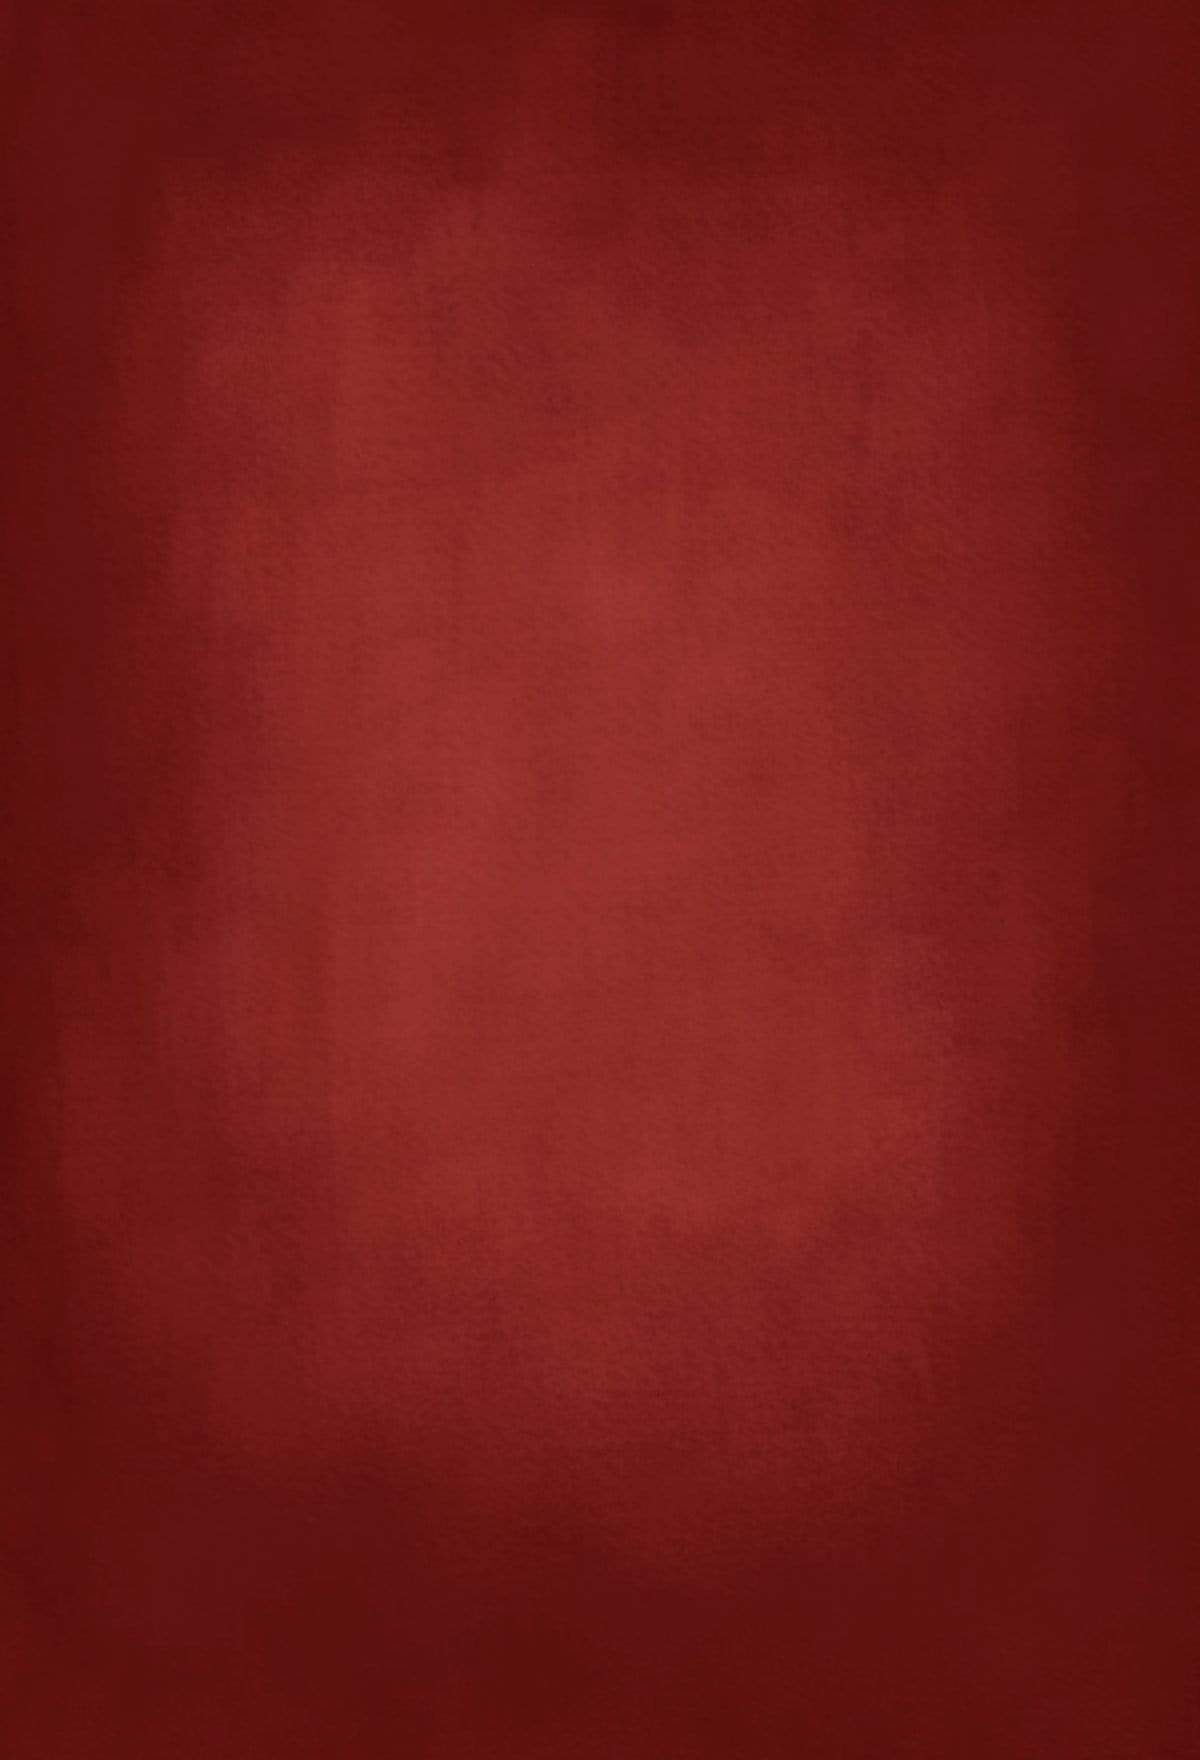 Kate Abstract Cold Red Texture Backdrop for Photography – Katebackdrop